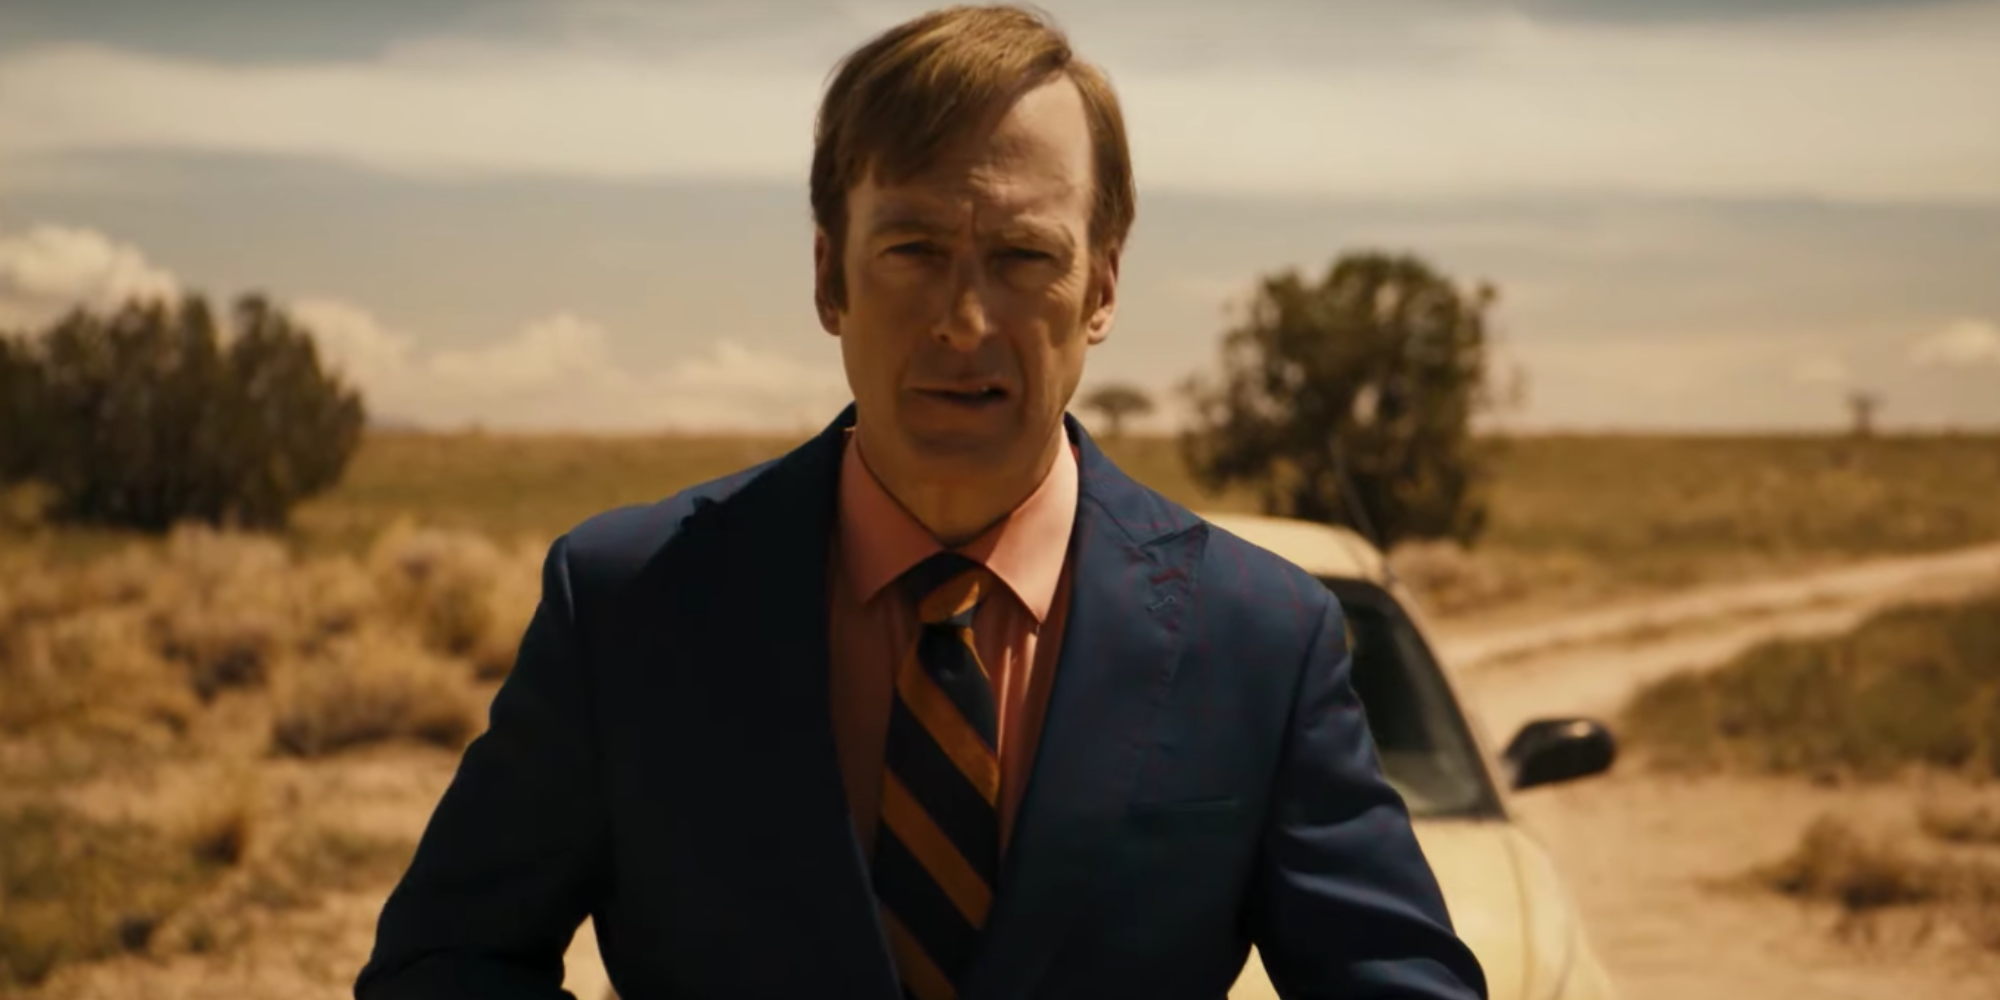 Better Call Saul season 5 jimmy stand in front of his car and waits for the cartel